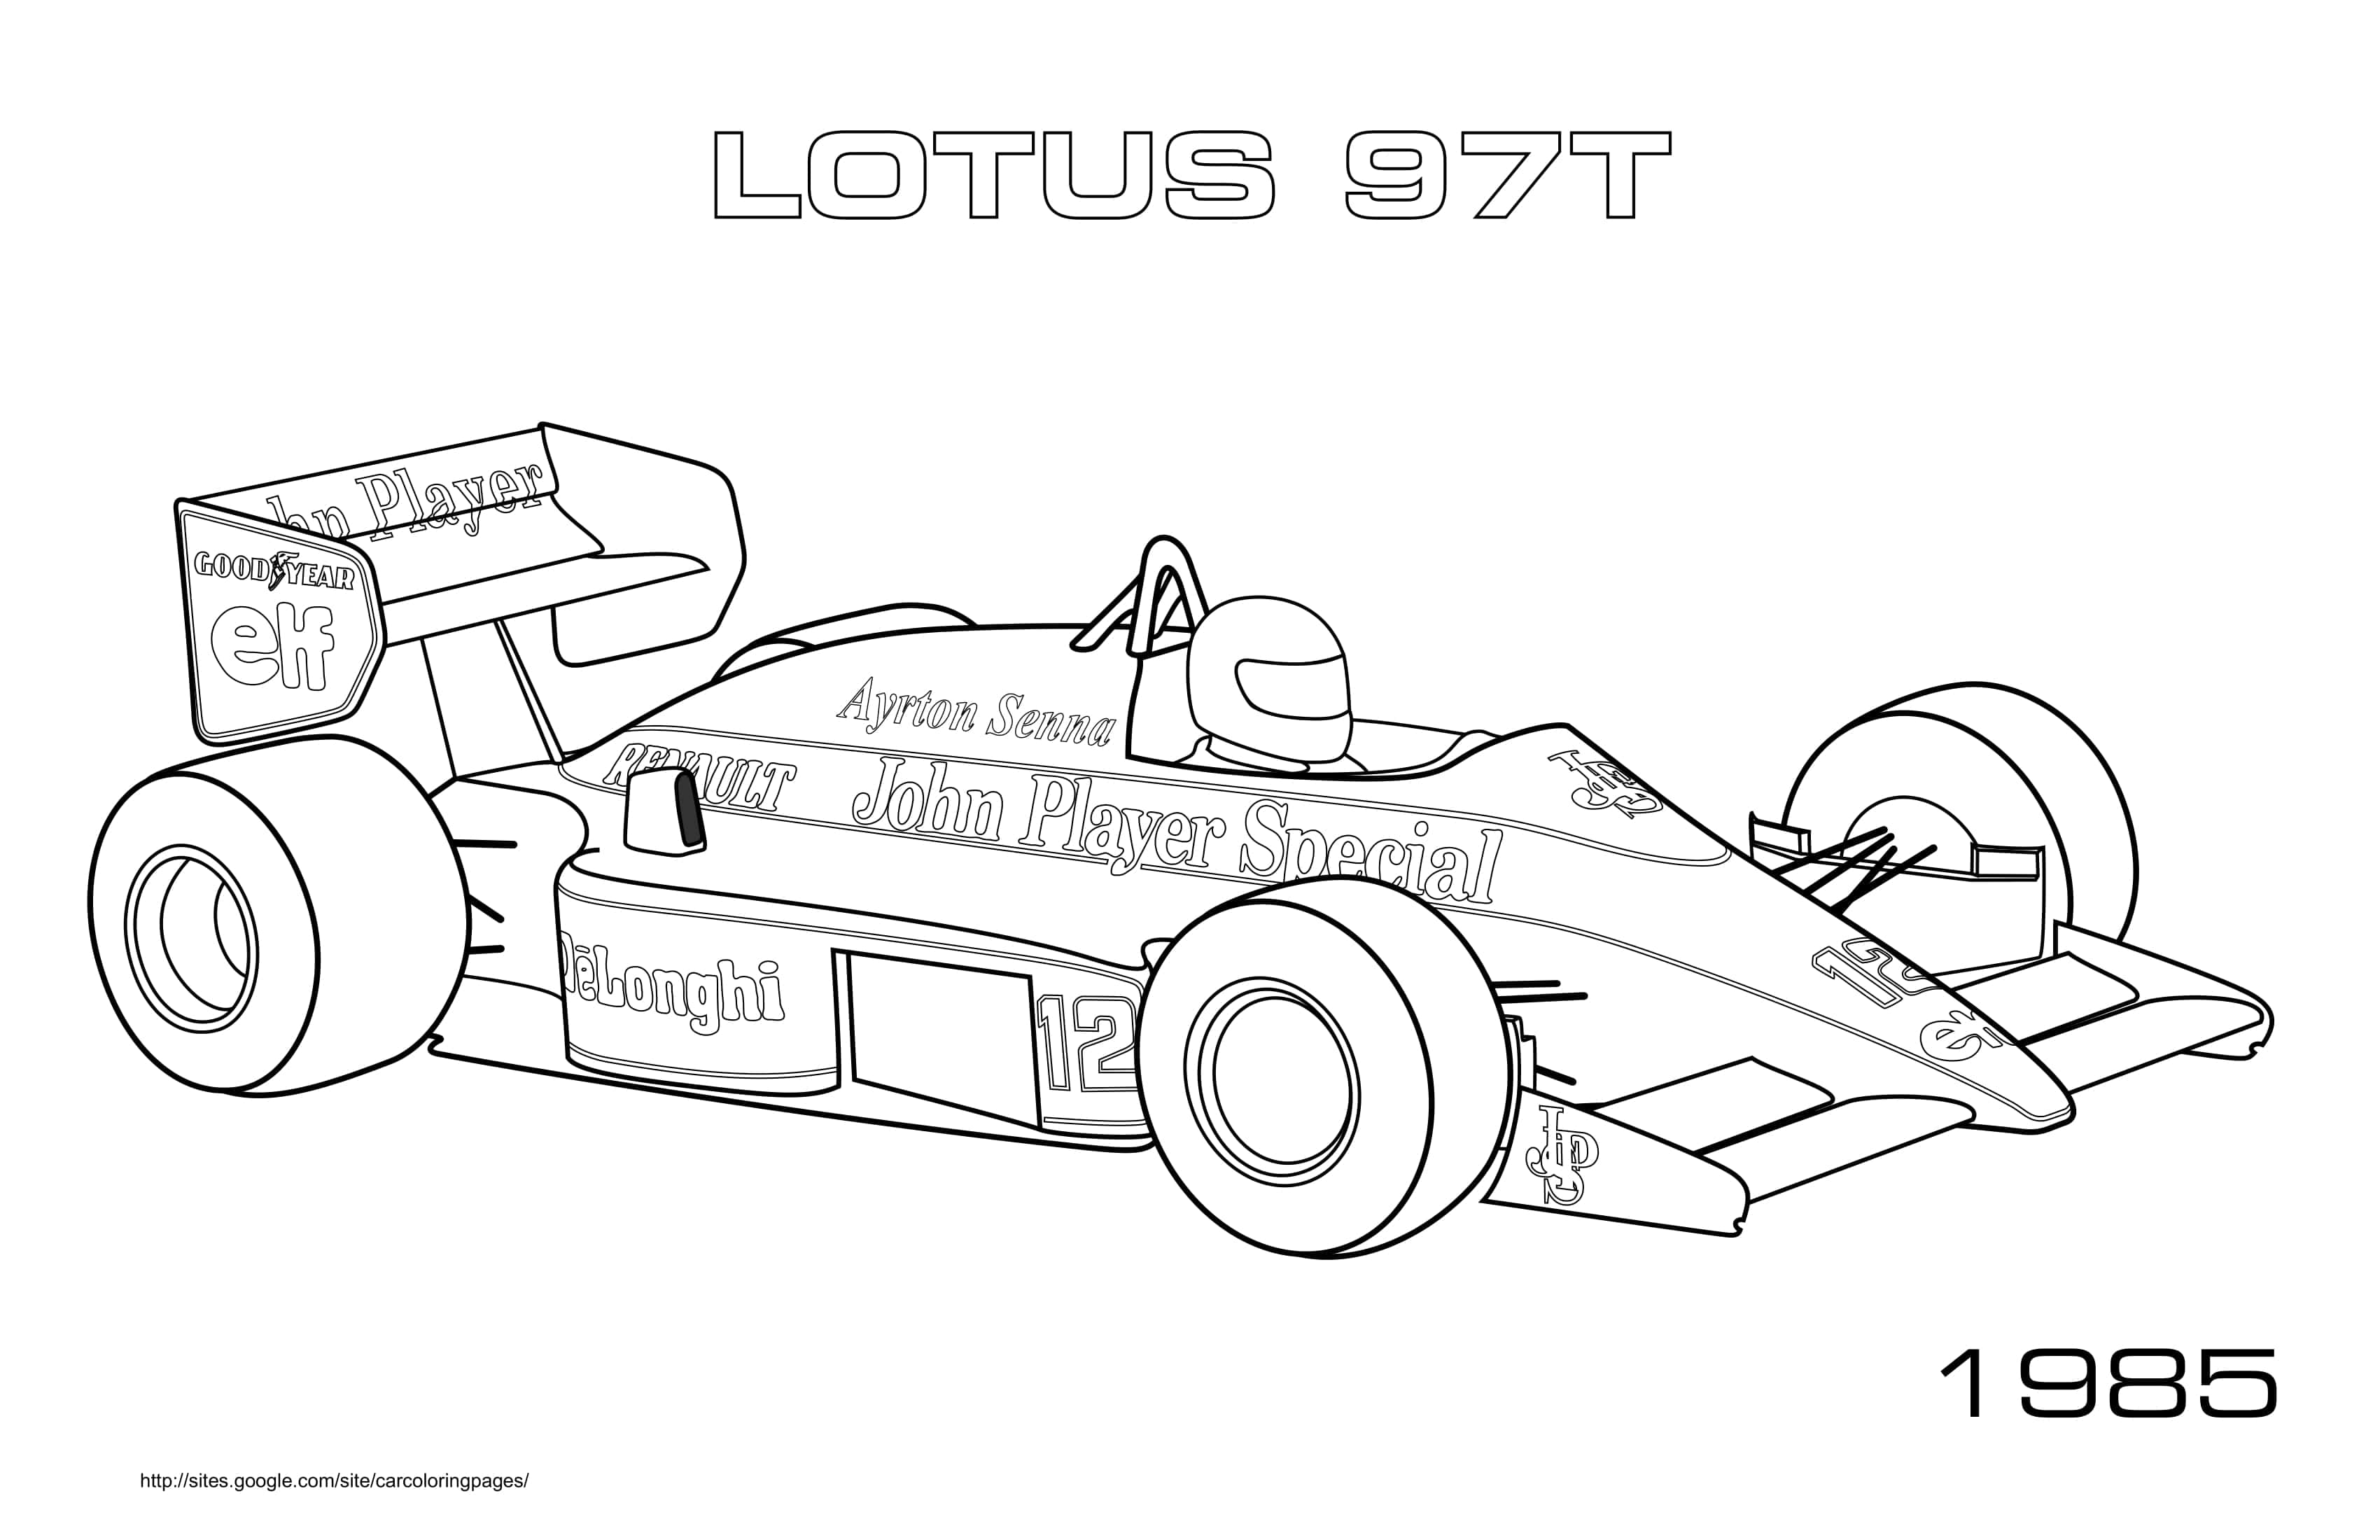 F1 Lotus 97t 1985 Coloring Page